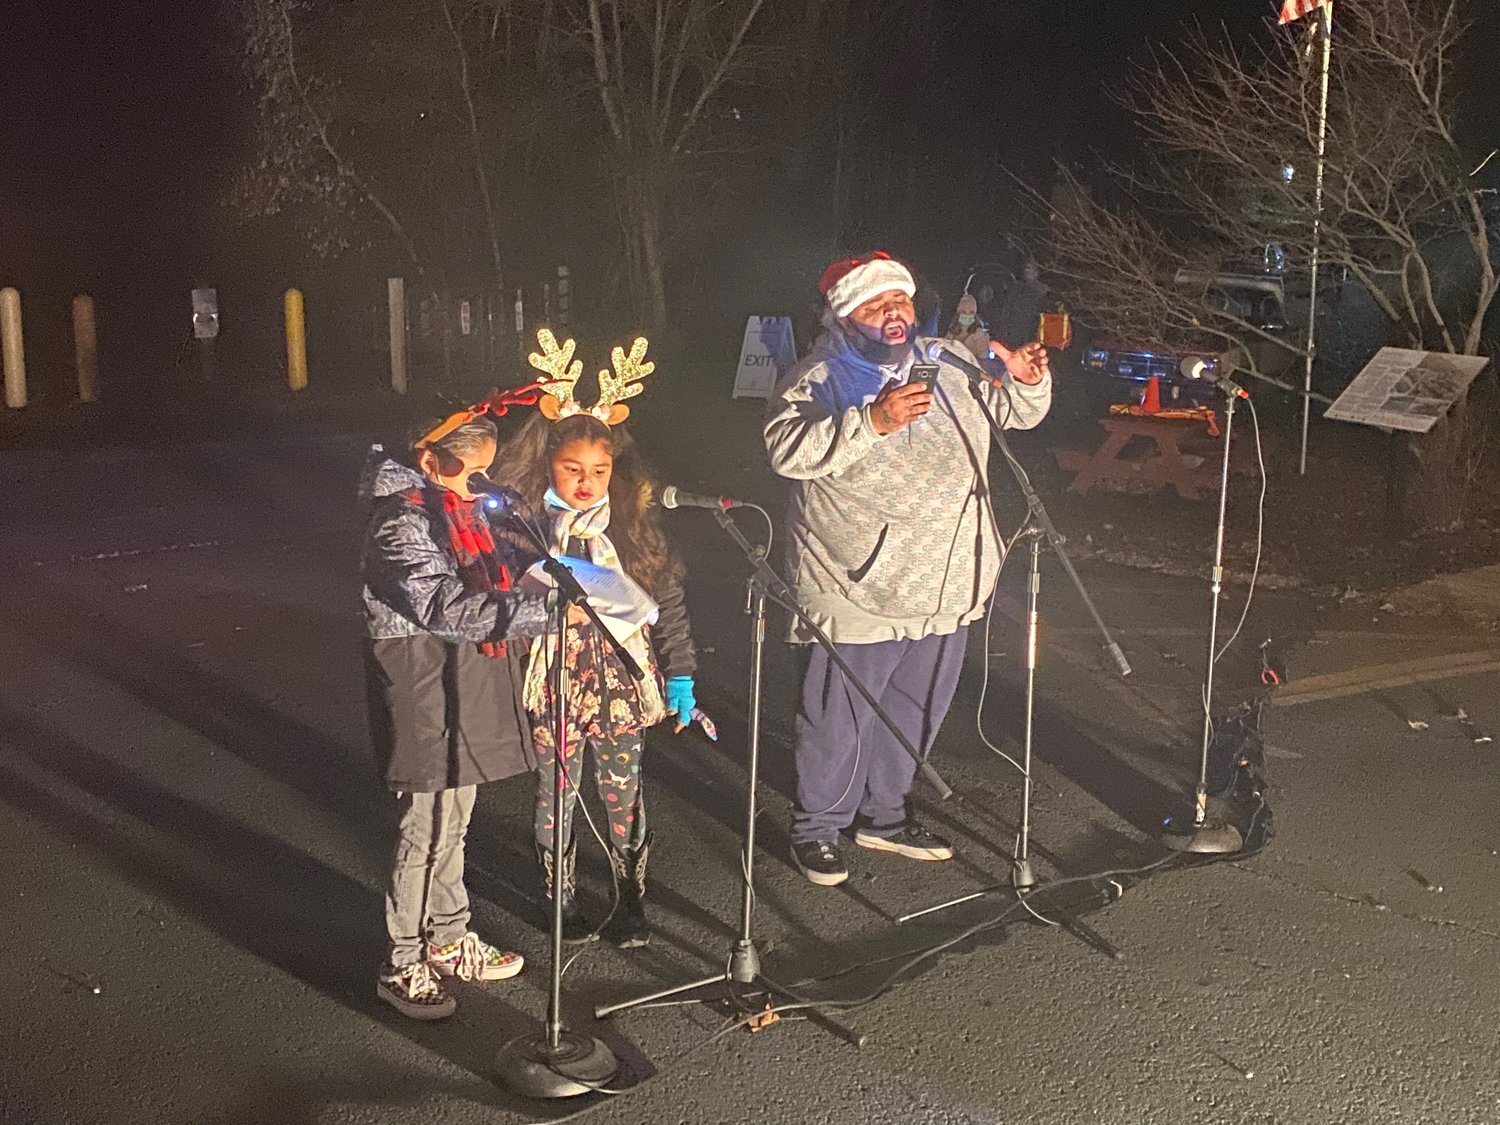 Rev. Charles Perez, pastor of the Barryville United Methodist Church, sings Christmas Carols with his two daughters.